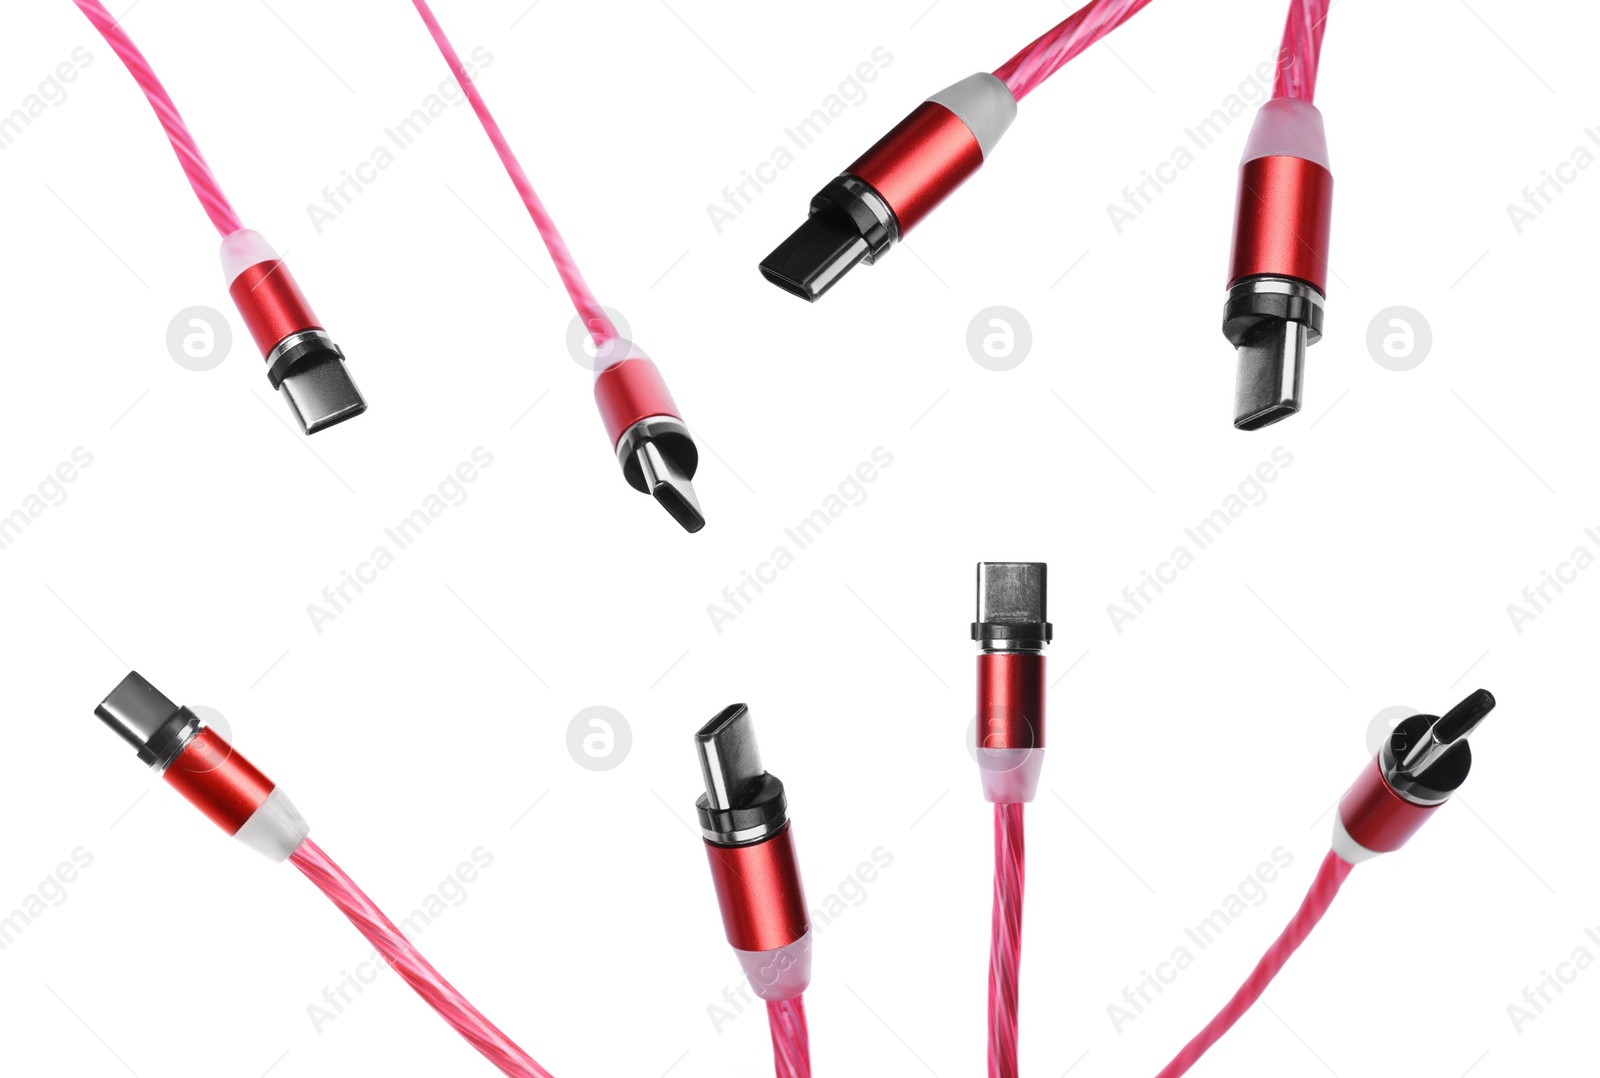 Image of Color cable with type C connectors on white background, views from different sides